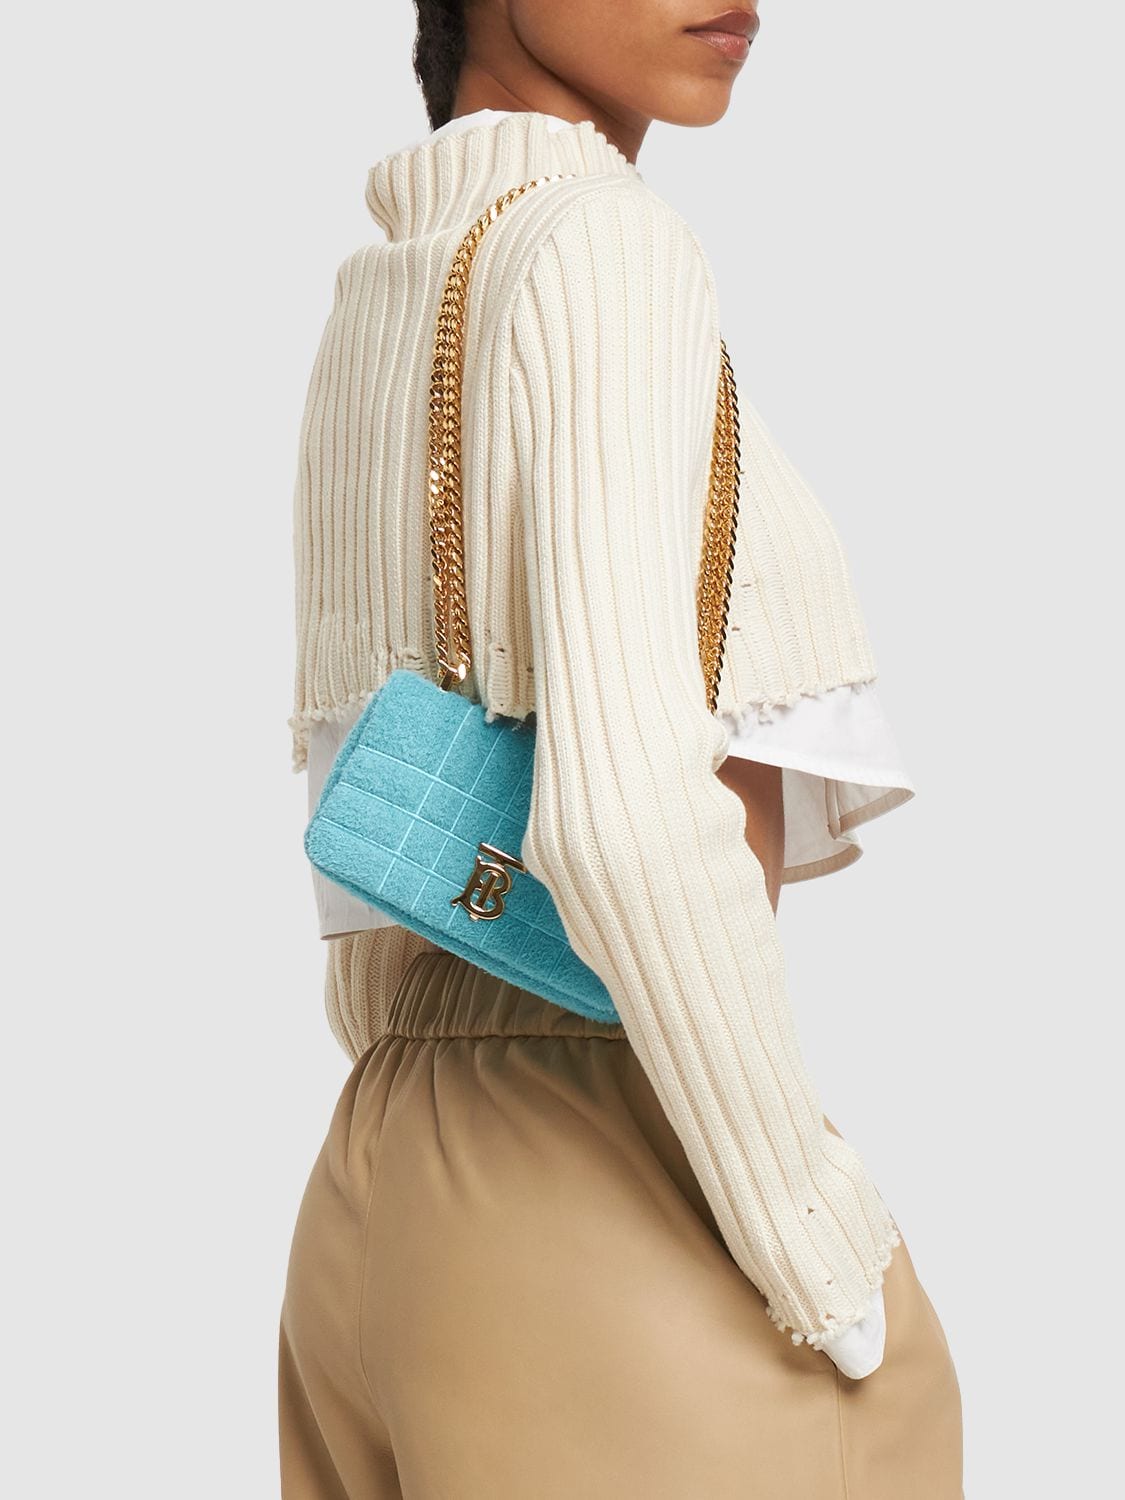 Shop Burberry Mini Lola Quilted Cotton Shoulder Bag In Vivid Turquoise